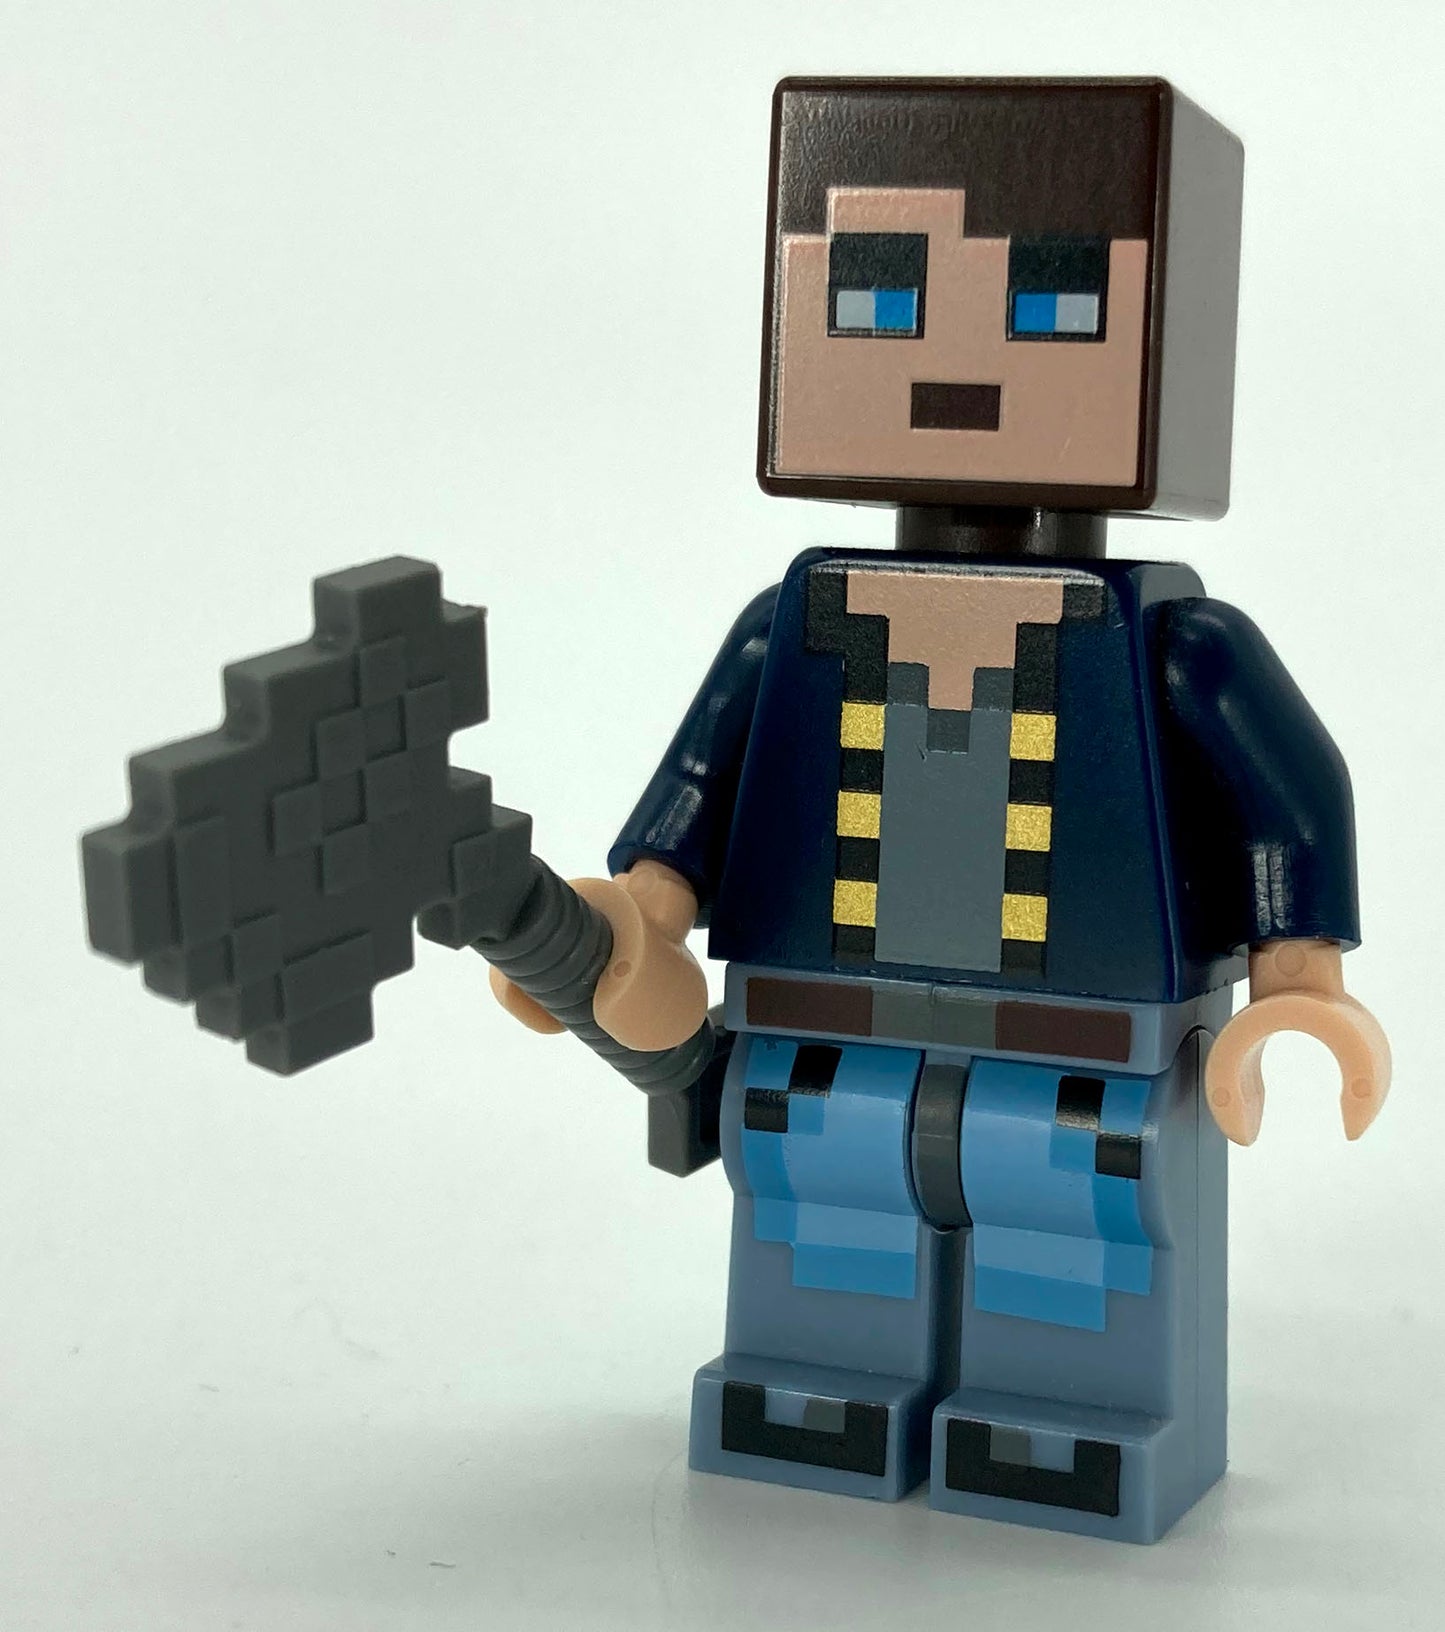 Minecraft Skin 8 - Pixelated, Dark Blue Jacket and Bright Light Blue and Sand Blue Legs